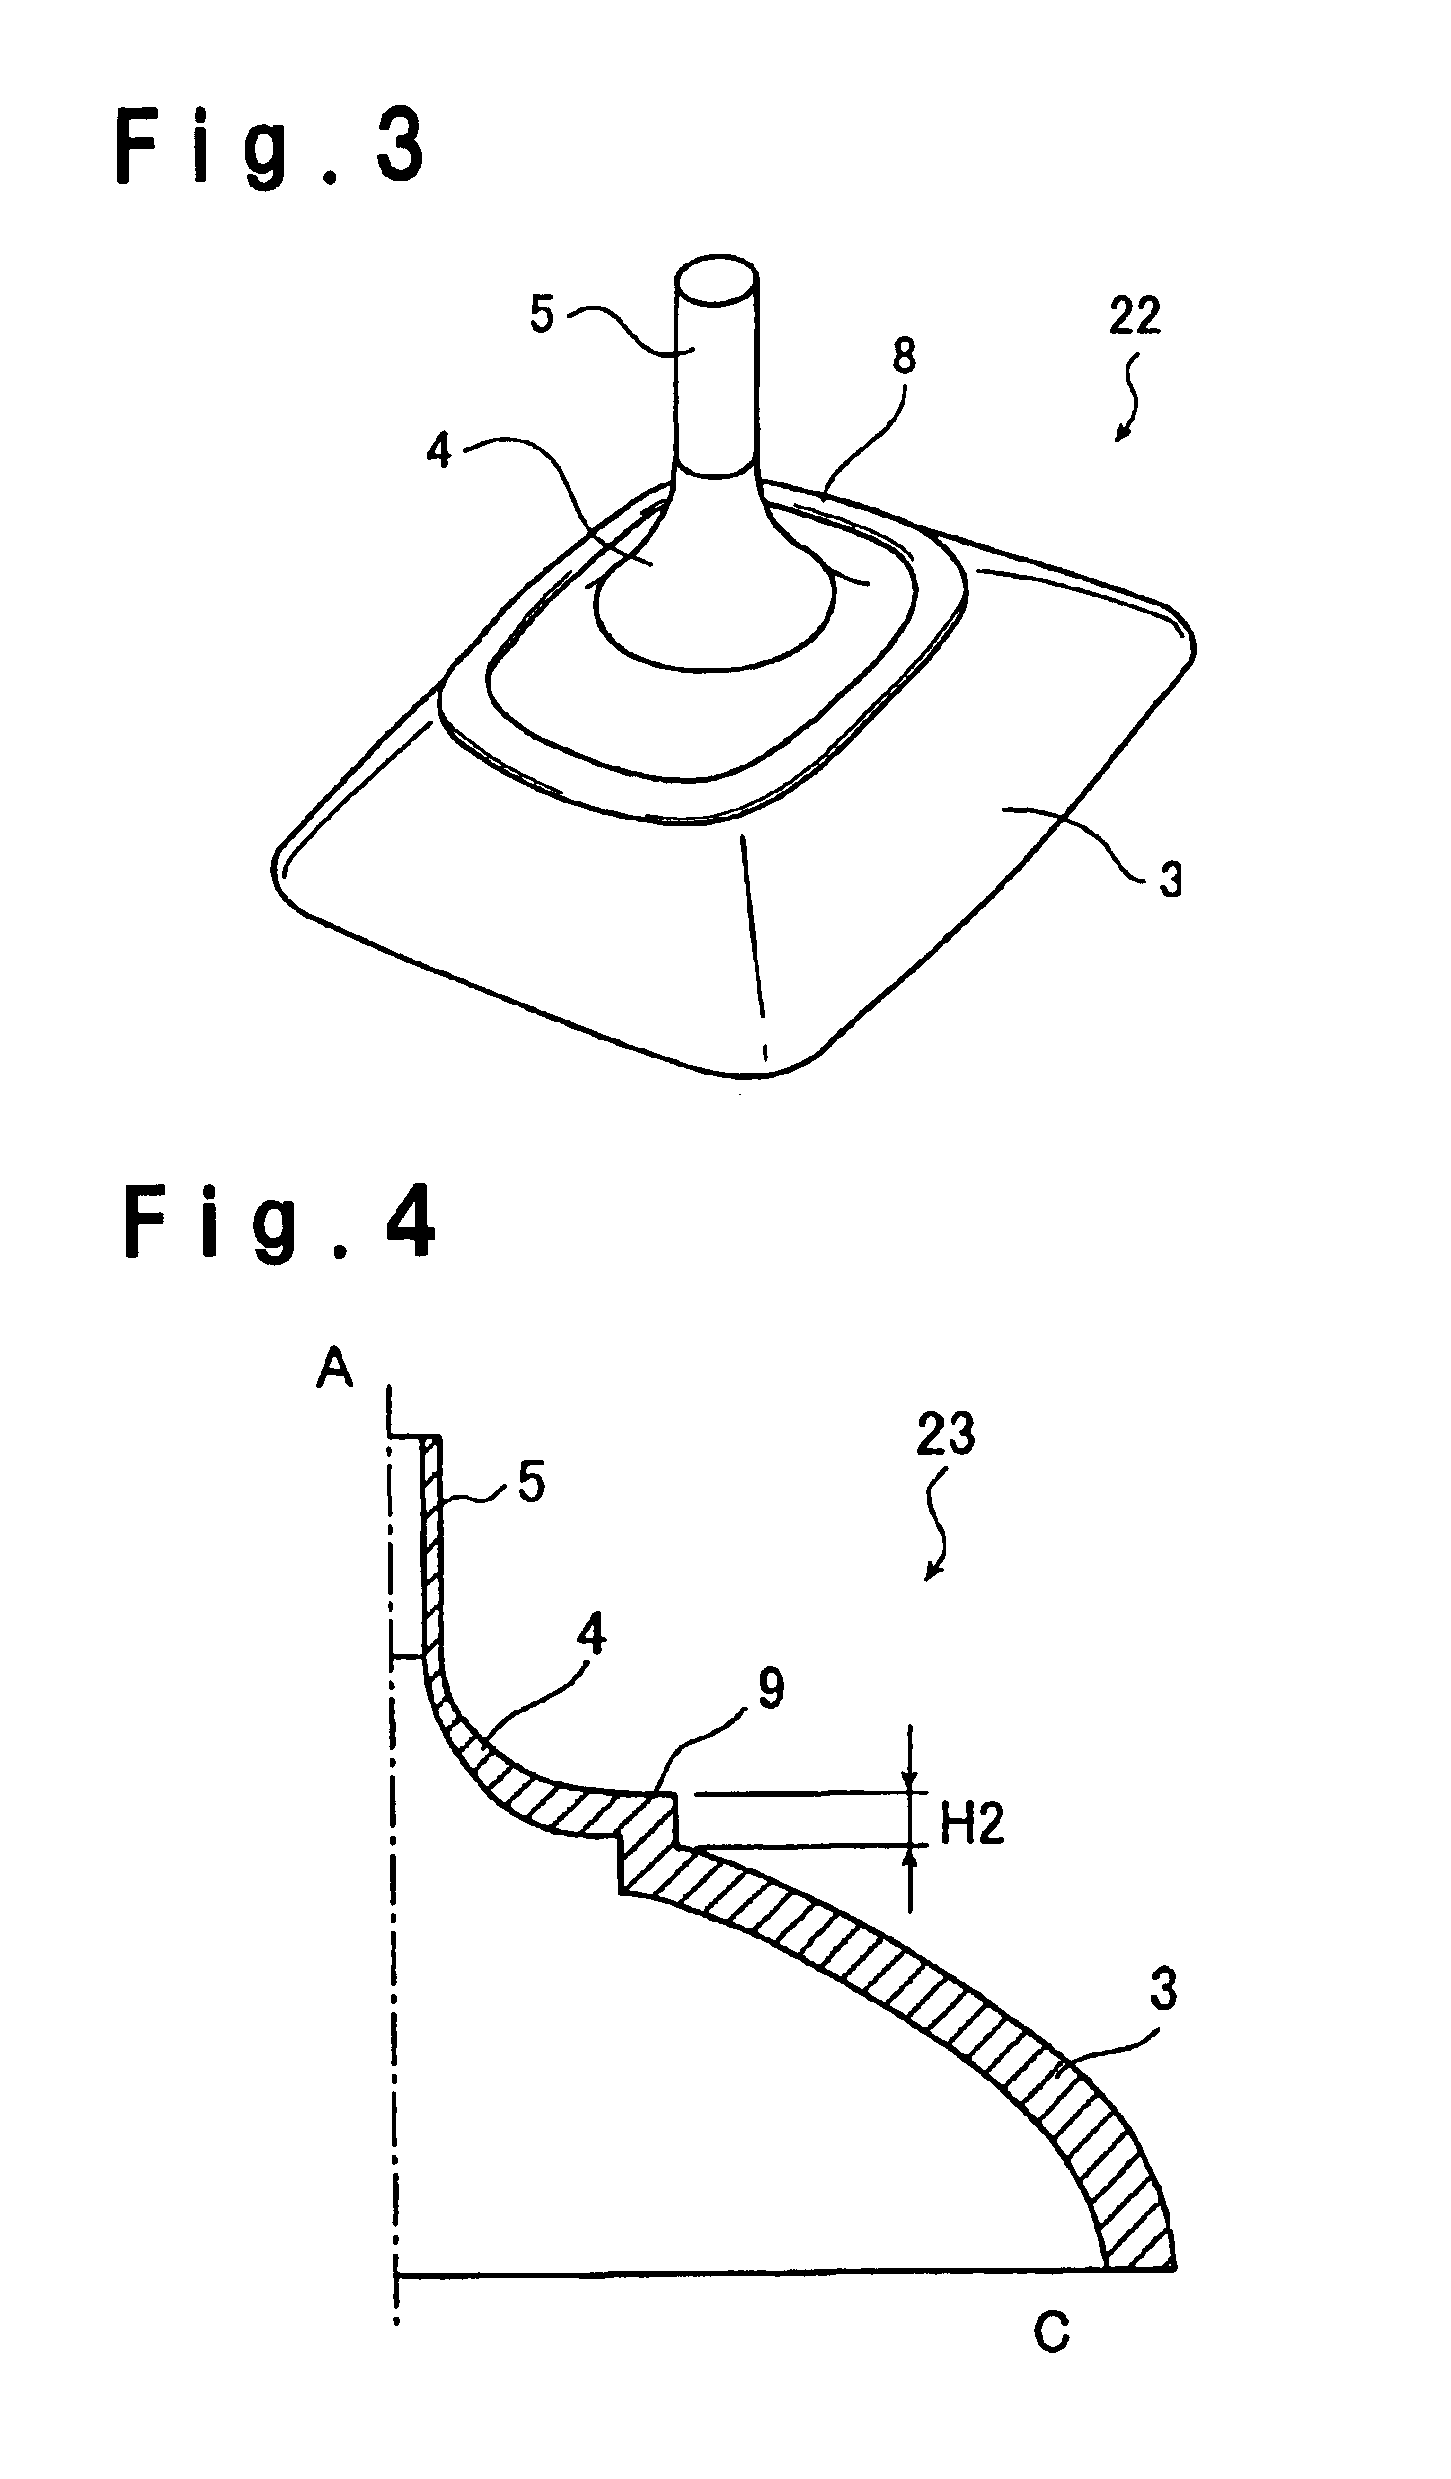 Glass funnel for a cathode ray tube and cathode ray tube